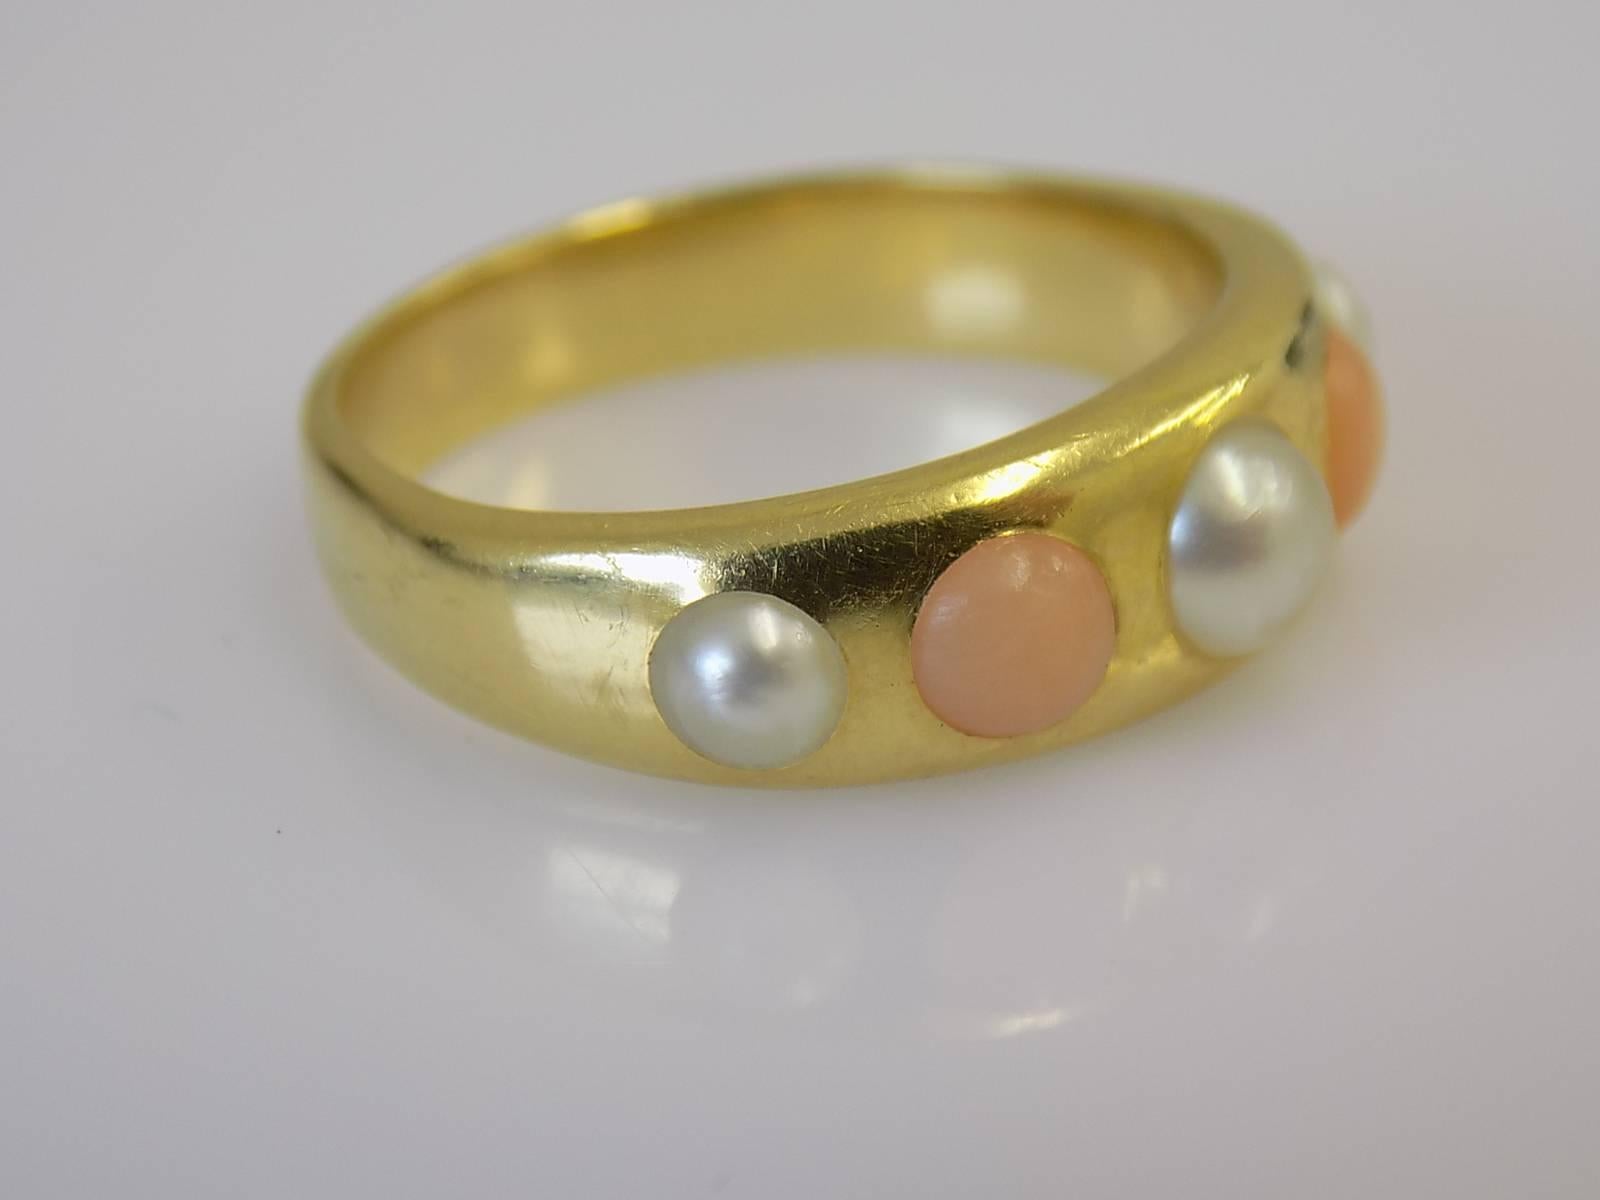 An Outstanding quality Victorian c.1880 18 Carat Yellow gold, Coral and half pearl ring. English origin.
Size O 1/2 UK, 7.5 US.
Height of the face 6mm.
Weight 7.4gr.
Marked: JW-maker,  18 for 18 Carat Gold.